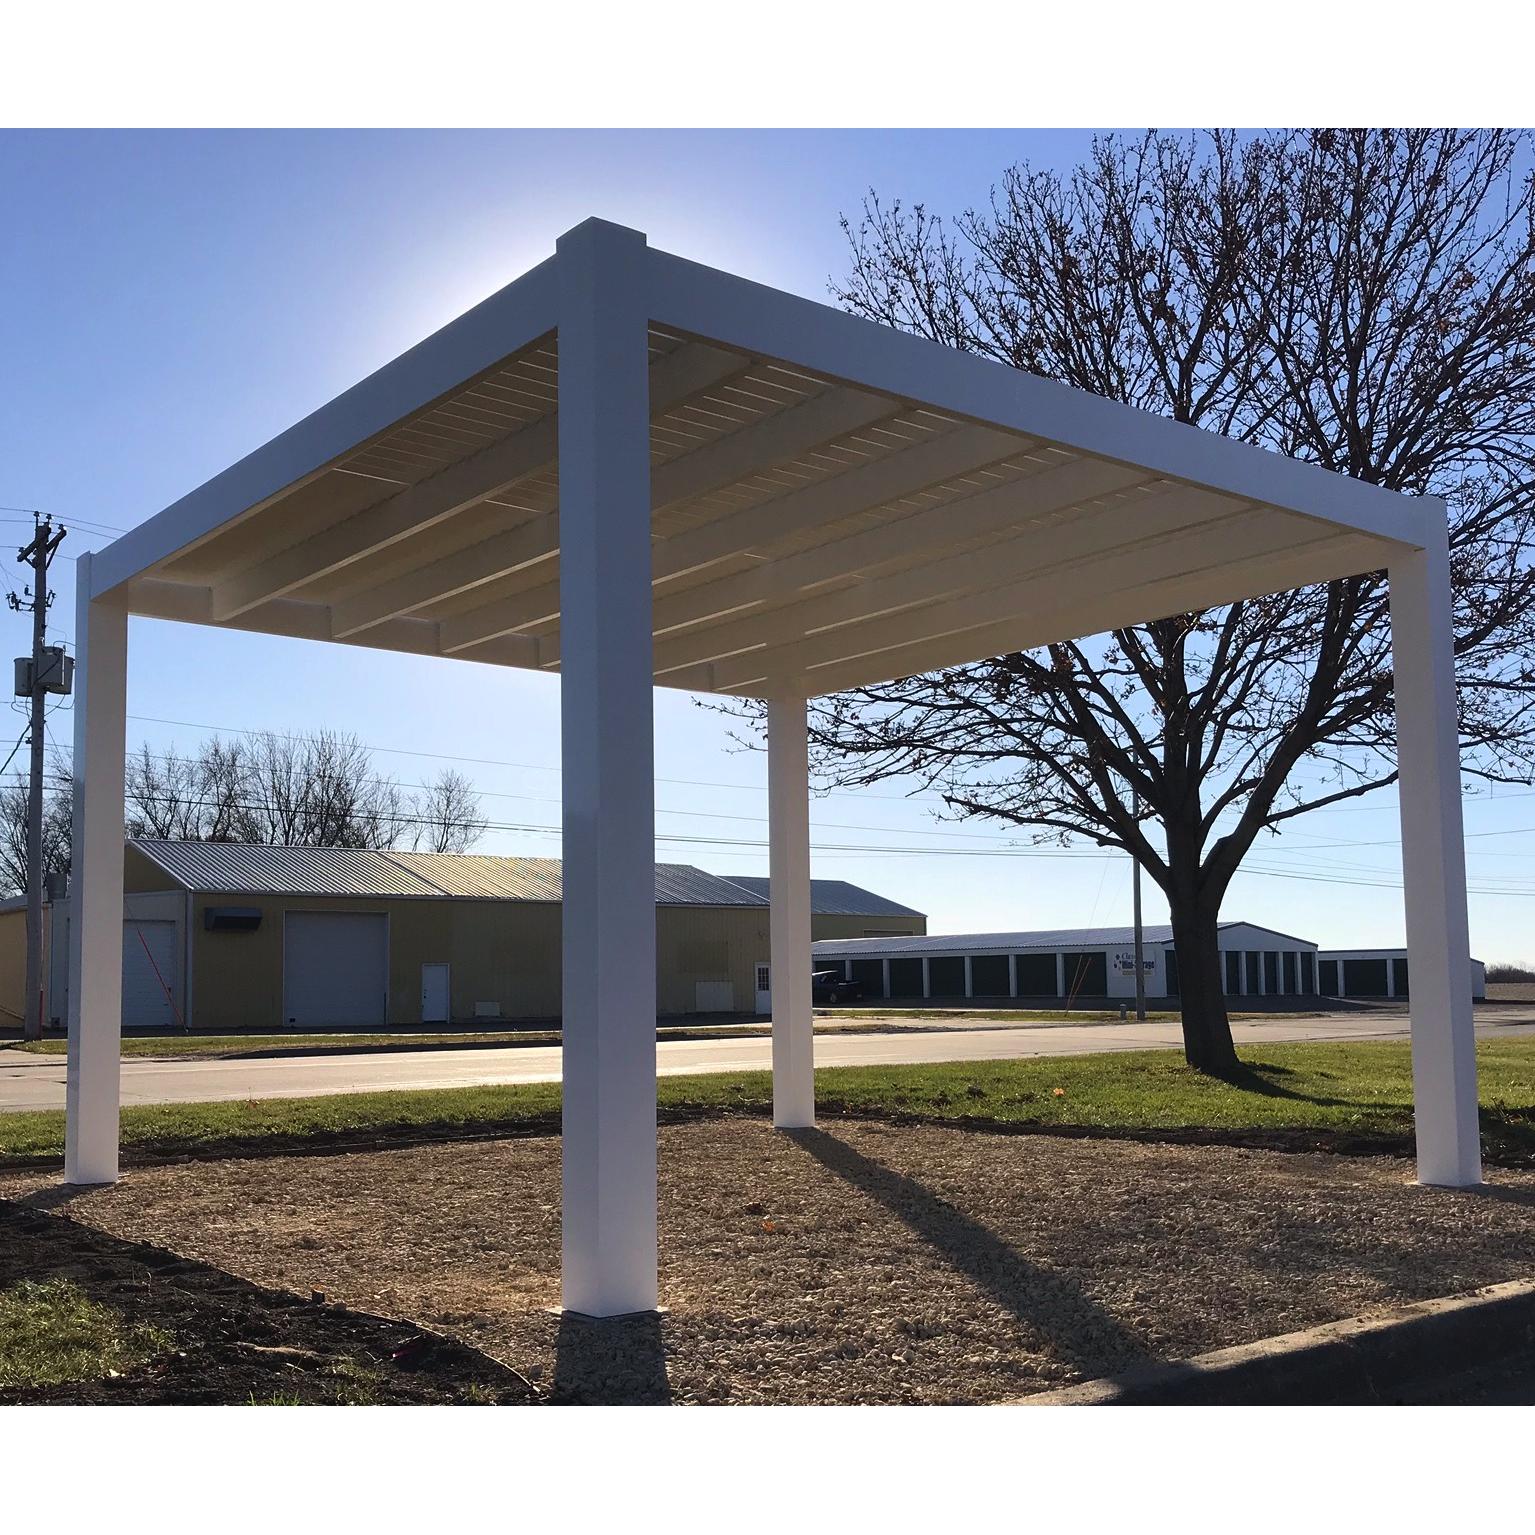 Picture of a 4-post stand-alone modern pergola covering a dirt area next to a road with commercial building across the street in the background